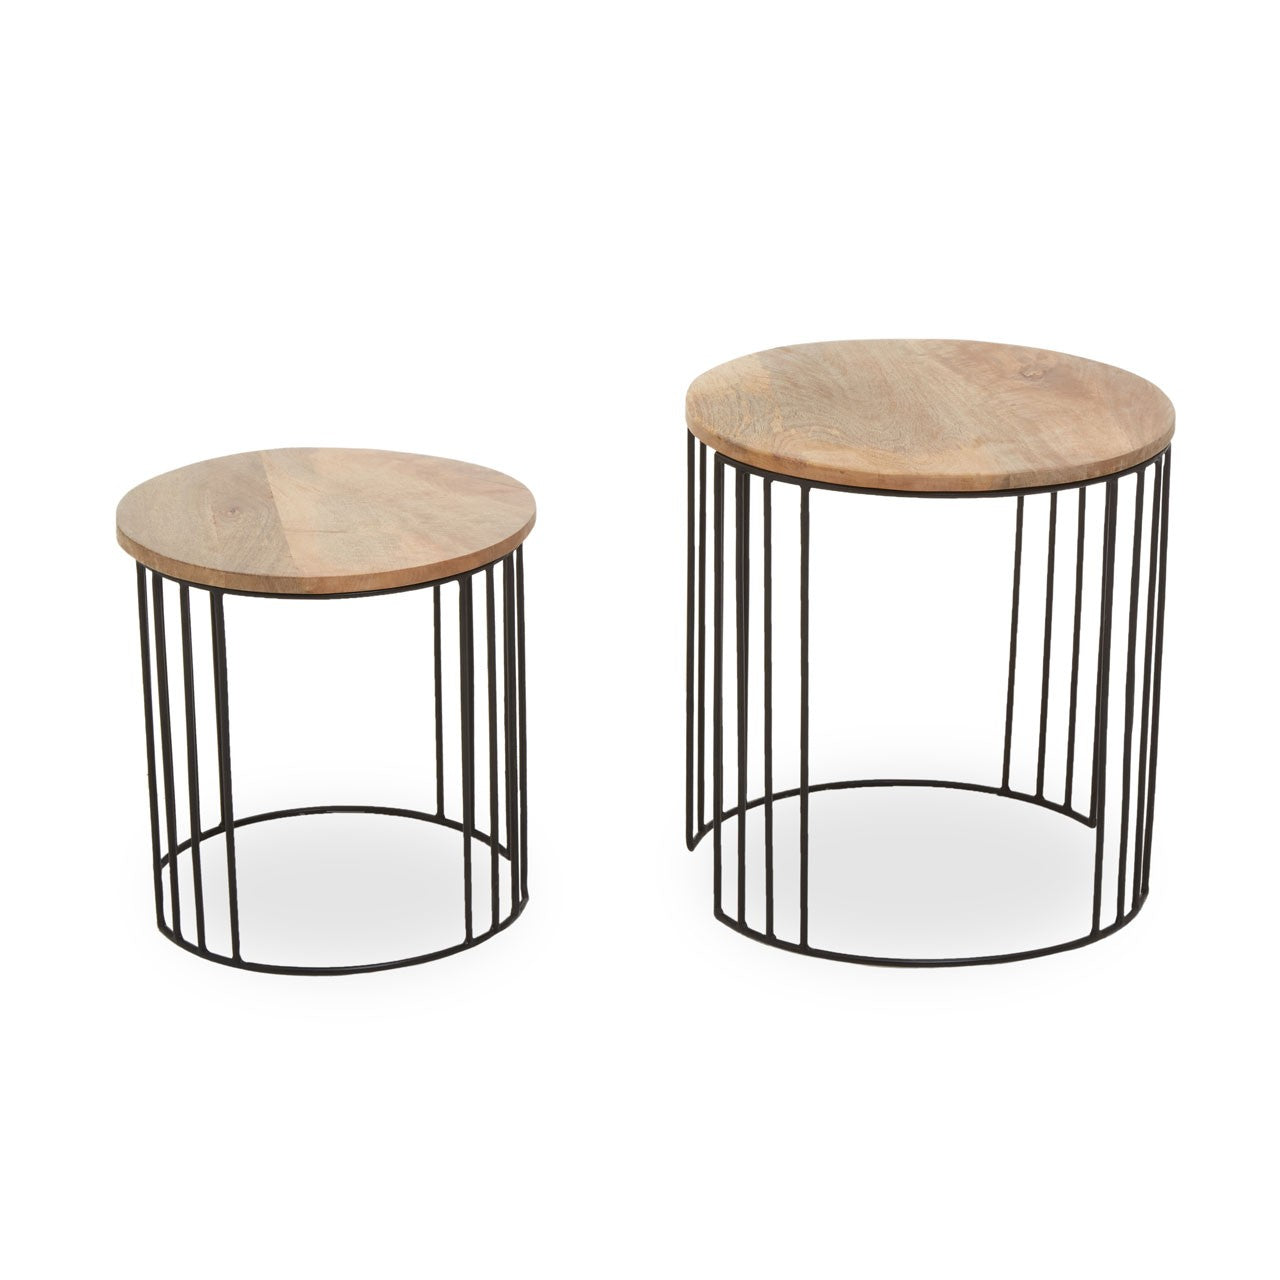 Mango Wood Side Tables With Metal Drum Base